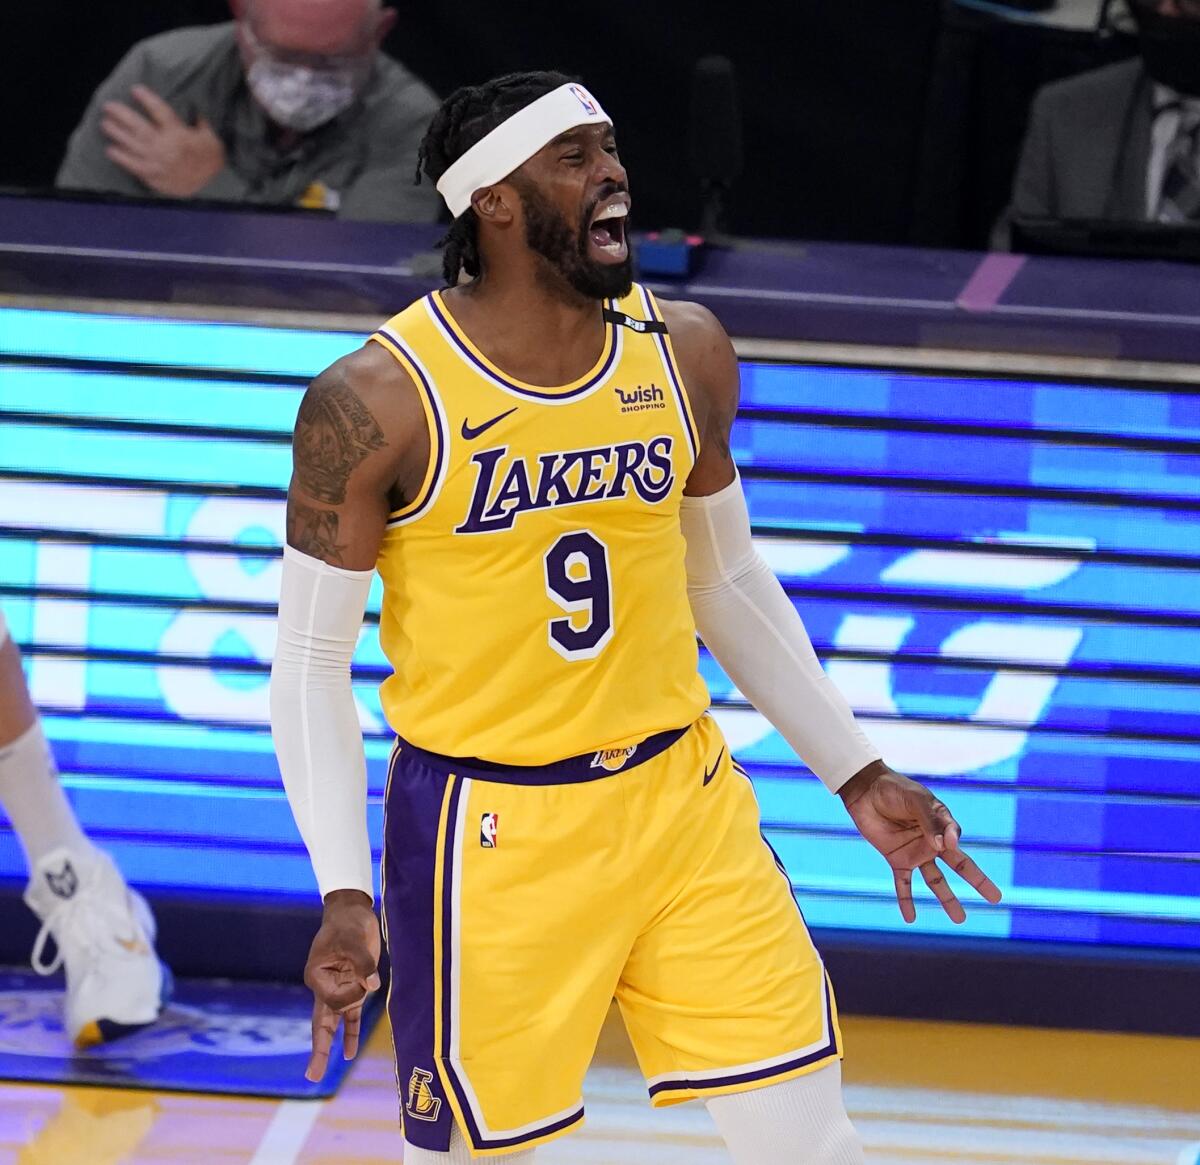 The Lakers' Wesley Matthews celebrates after making a three-pointer against the Phoenix Suns on May 27, 2021.